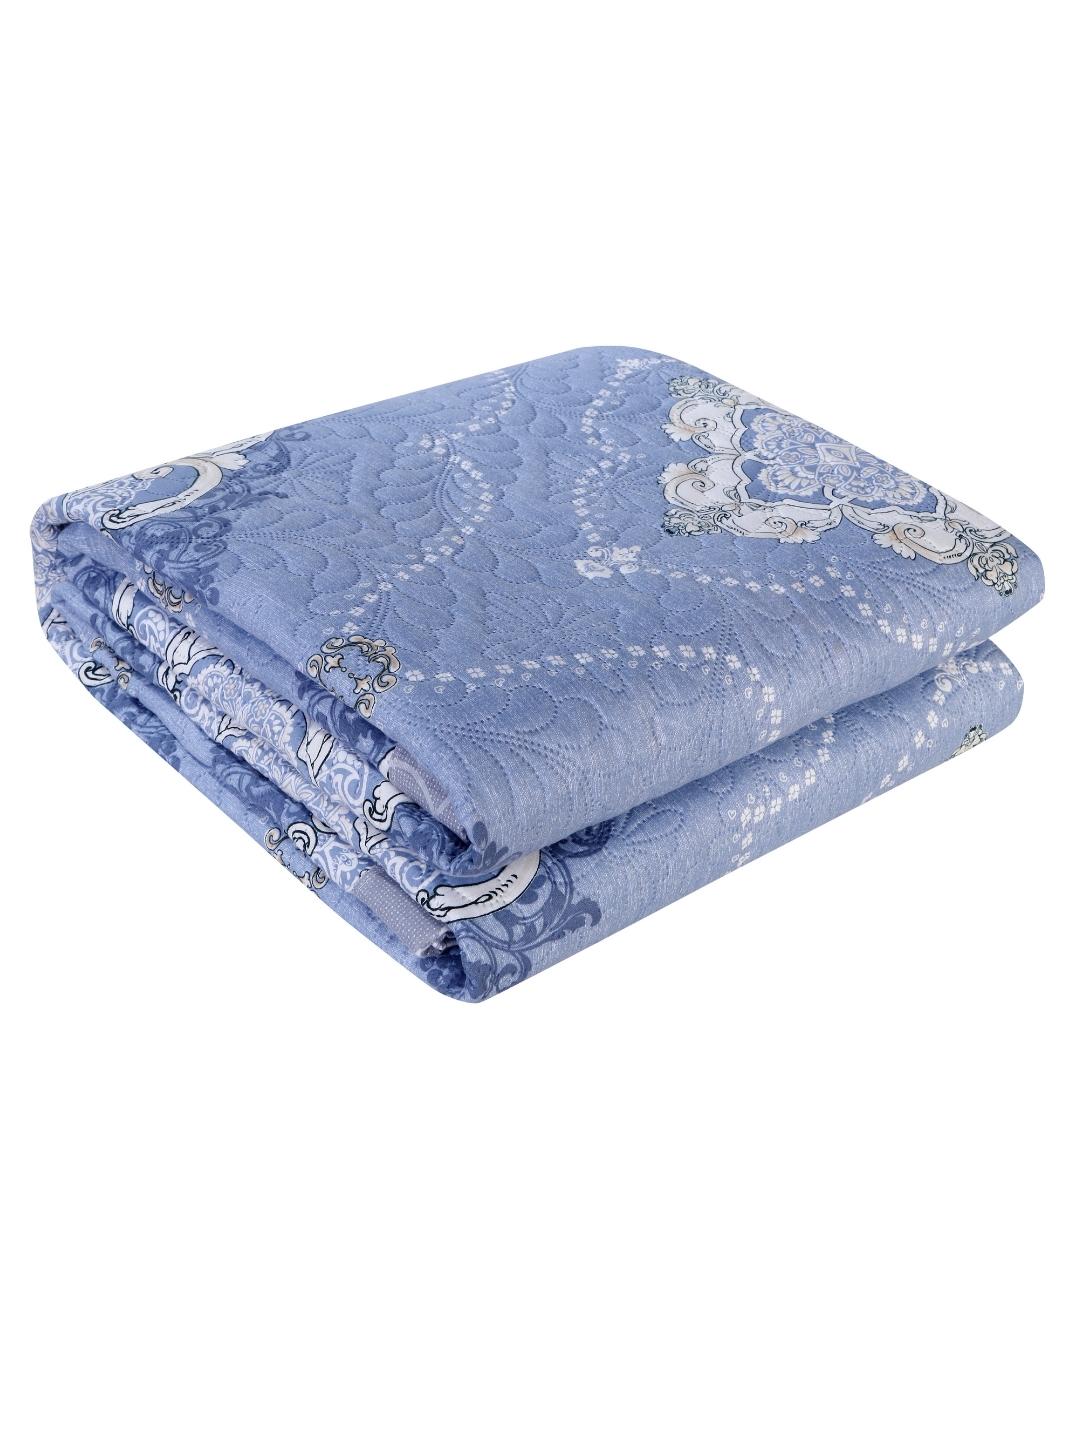 Floral Print Double Bed Light Weight Comforter- Blue and Grey